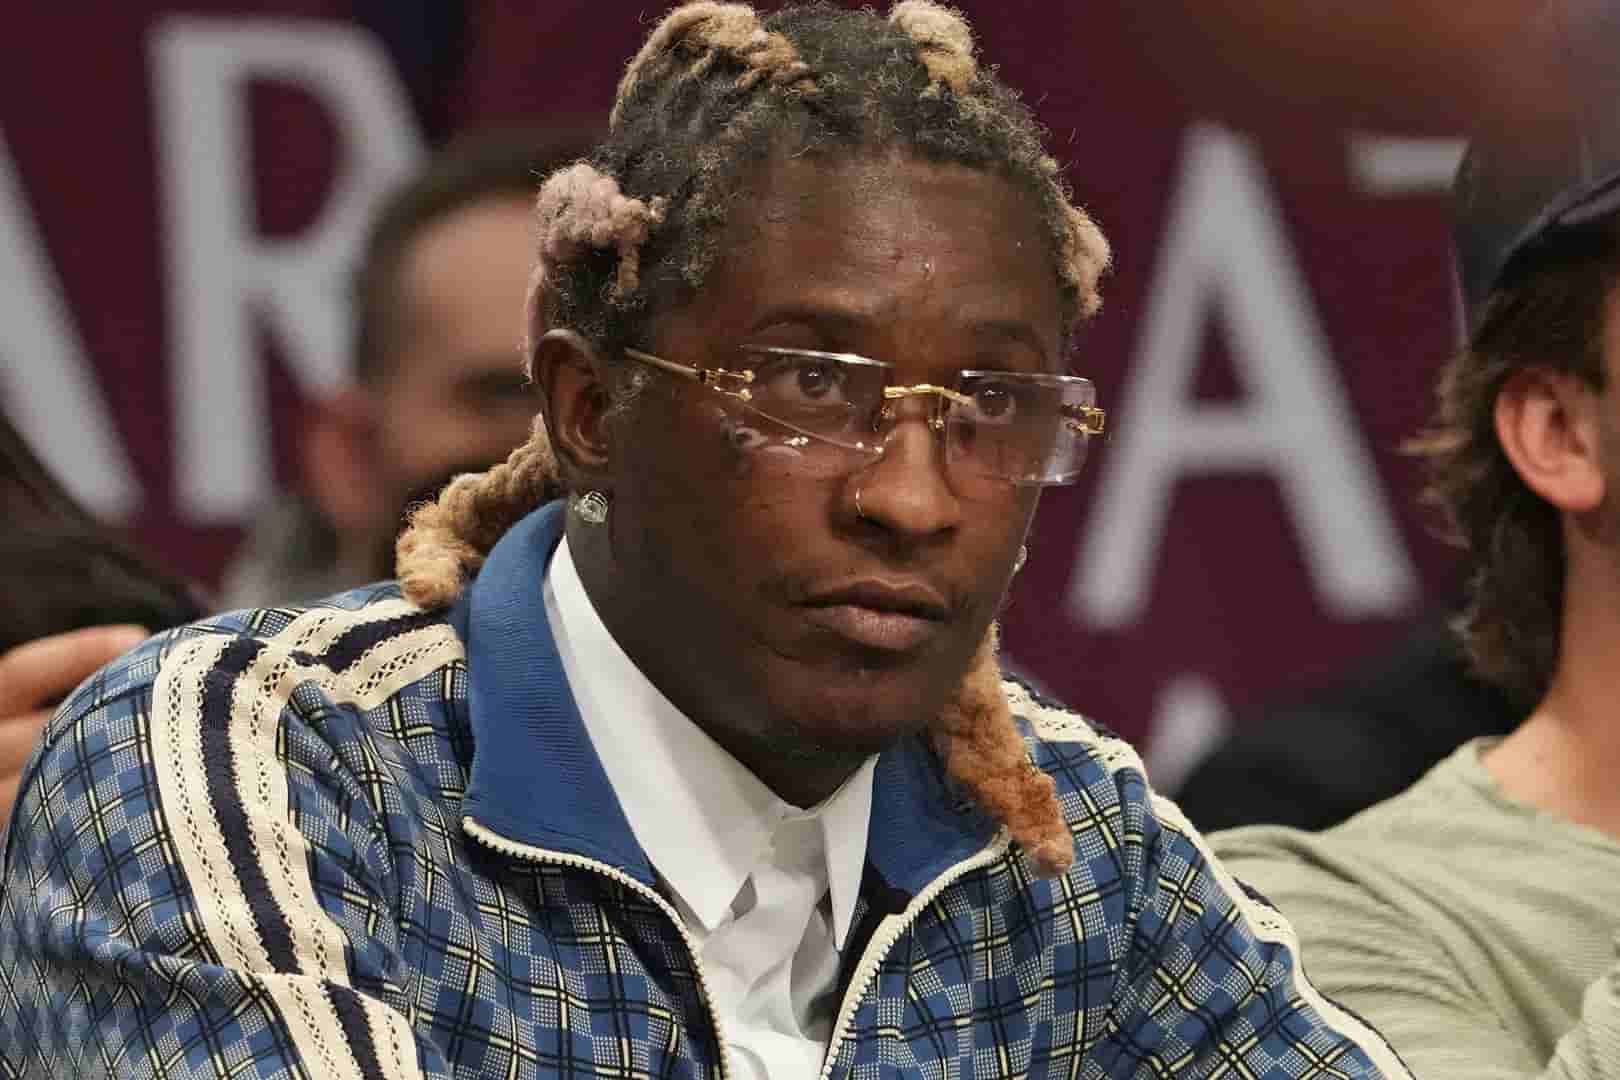 How did Angela Grier die? Young Thug's sister has died.